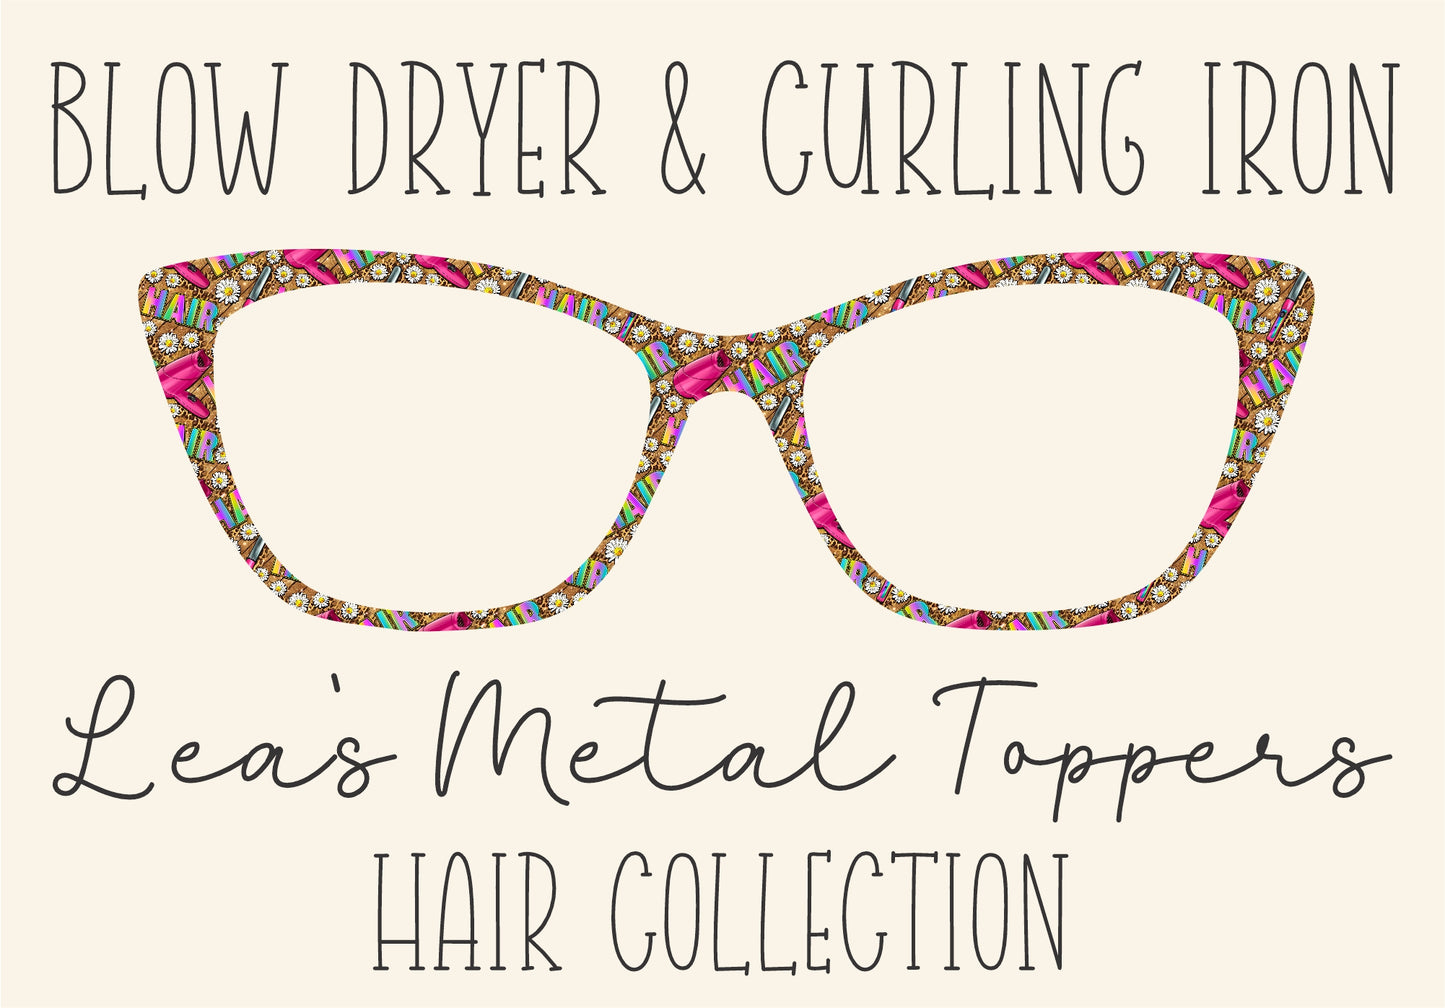 BLOW DRYER AND CURLING IRON Eyewear Frame Toppers COMES WITH MAGNETS